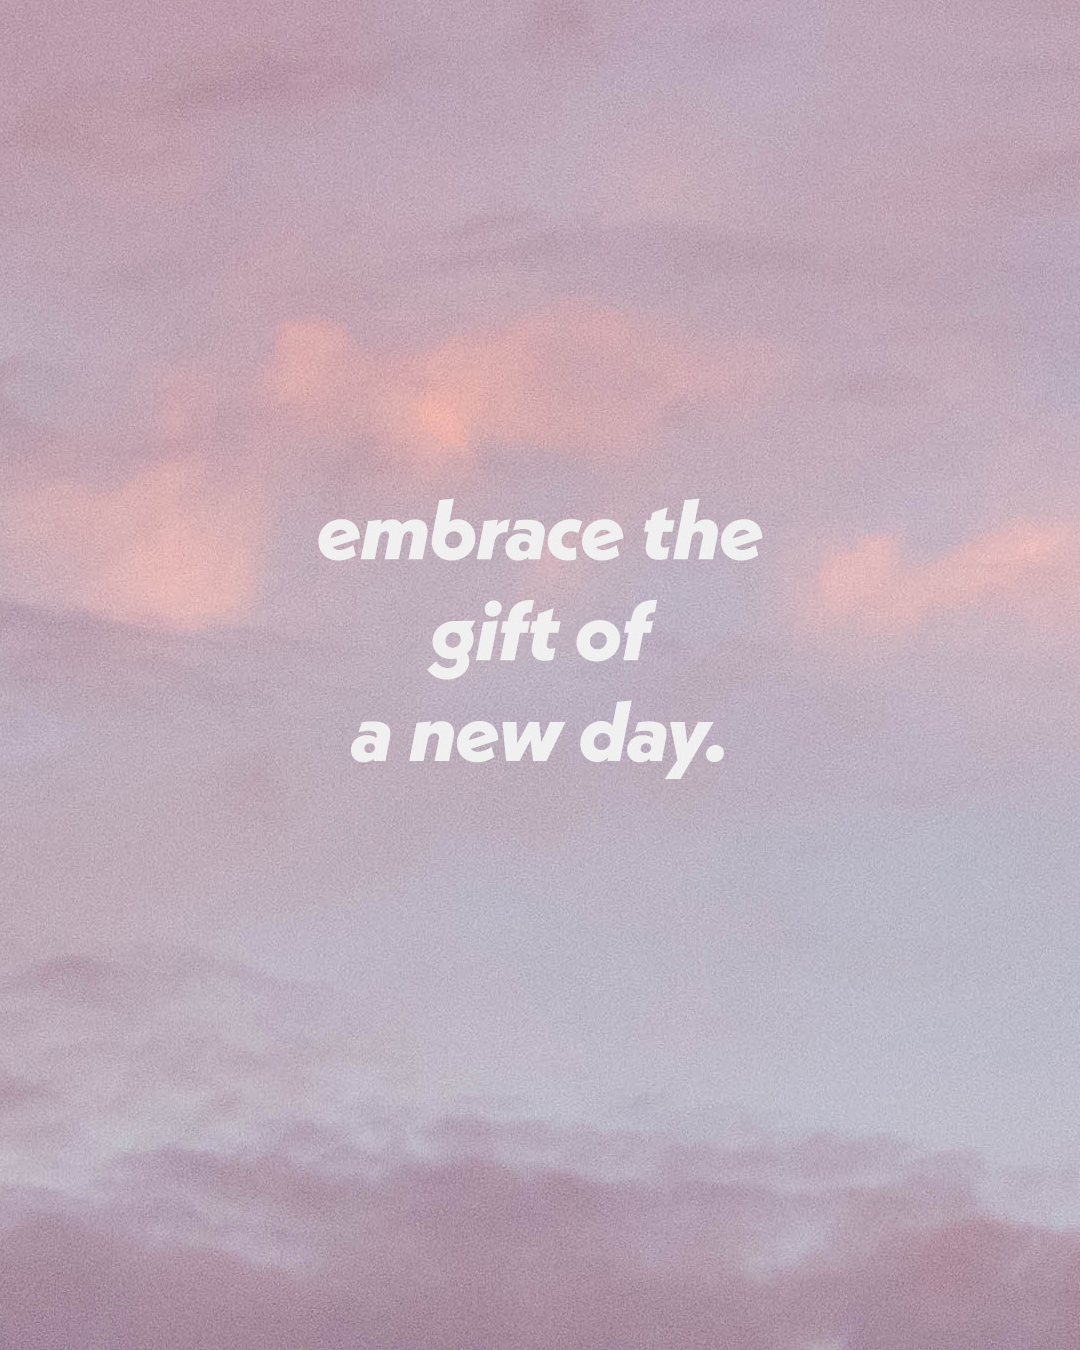 embrace the gift of a new day.